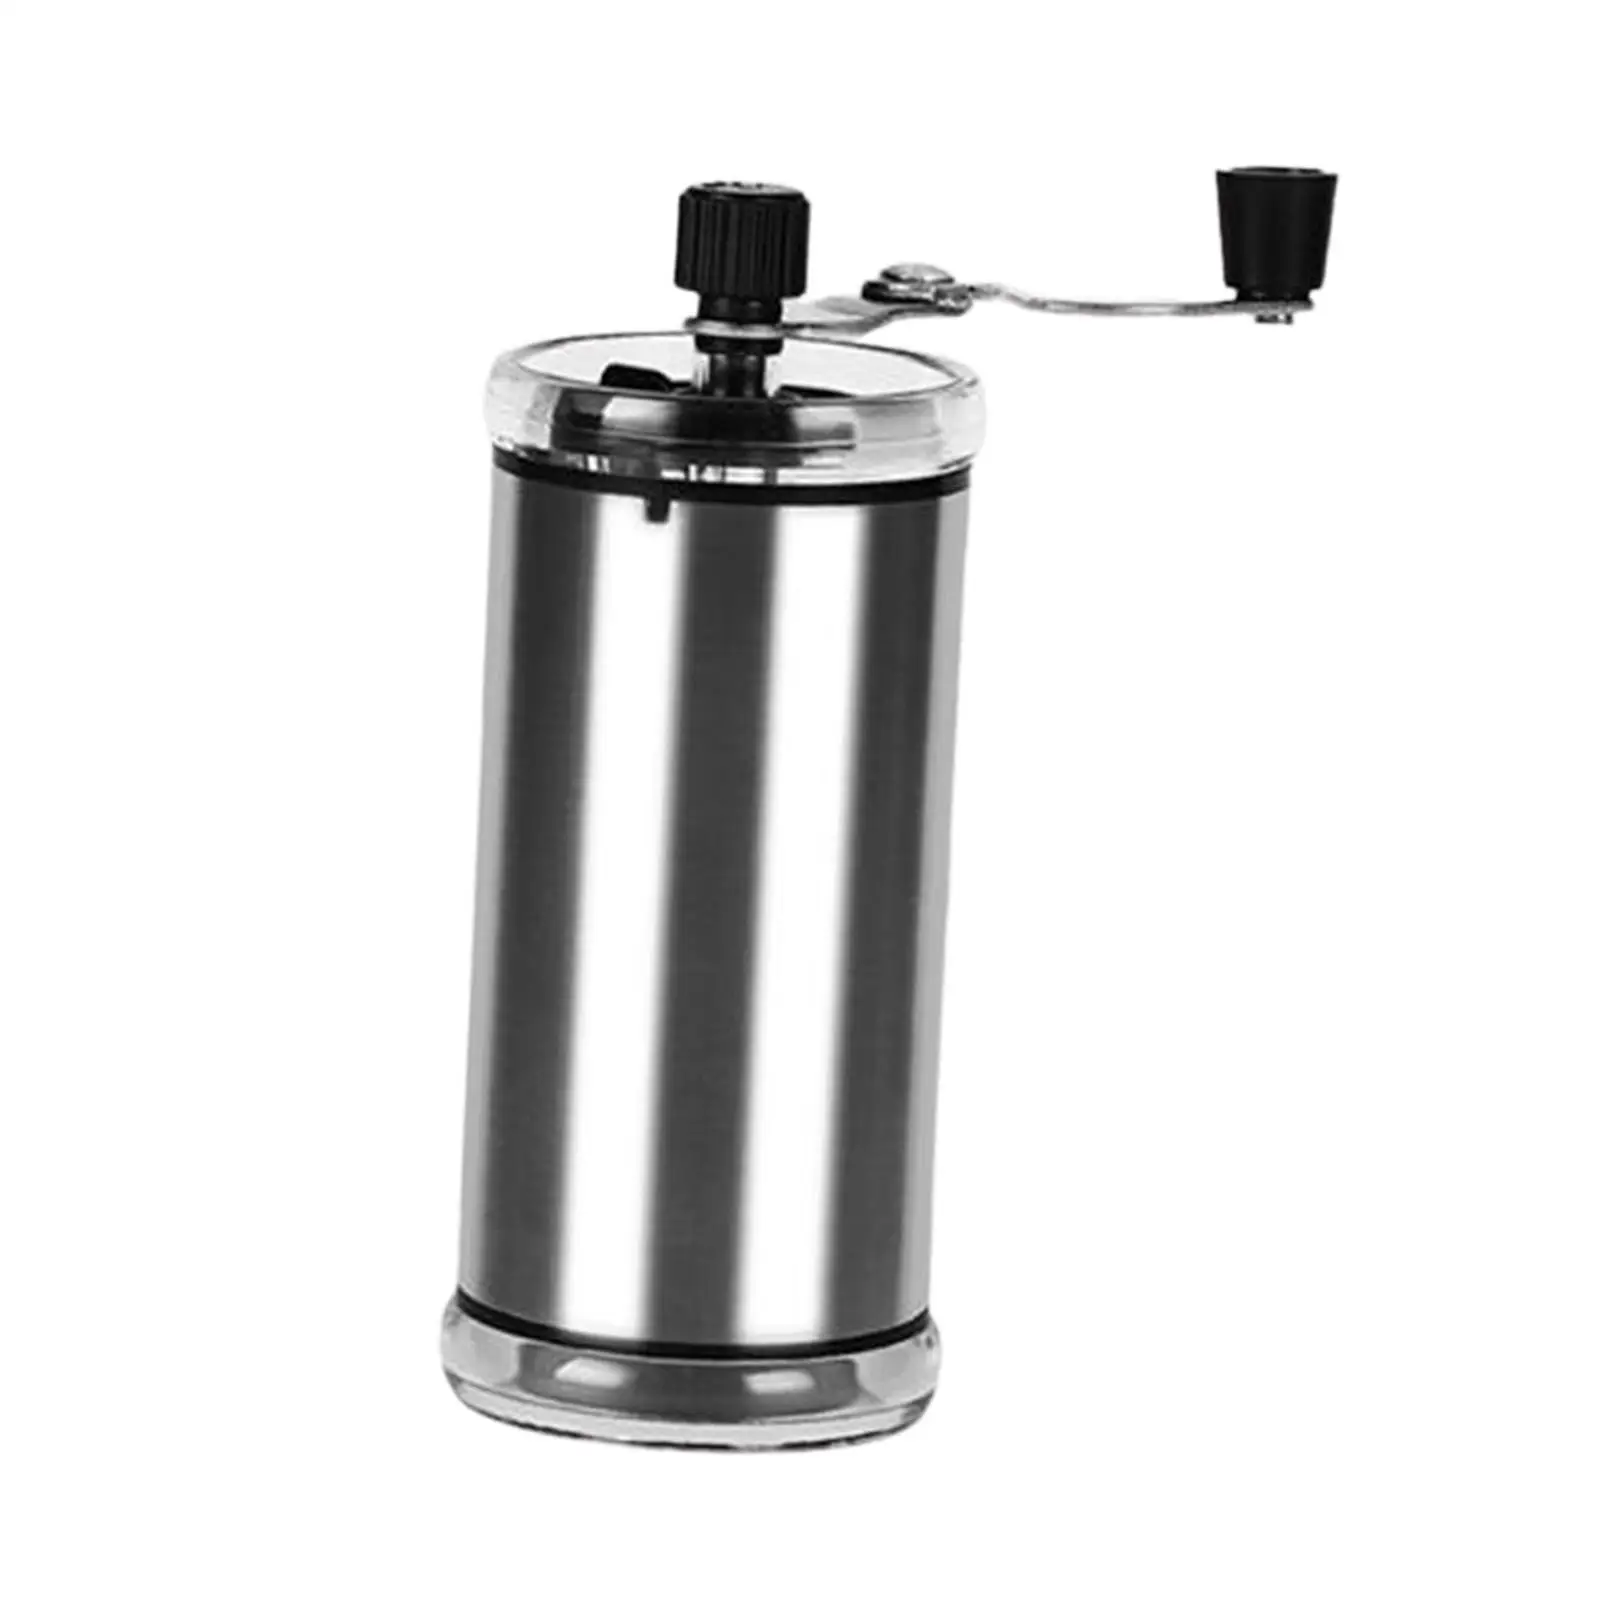 Mini Hand Coffee Grinder Stainless Steel Handheld Coffee Lover Gift Ceramics Burr Portable for Camping Travel Picnic Travel